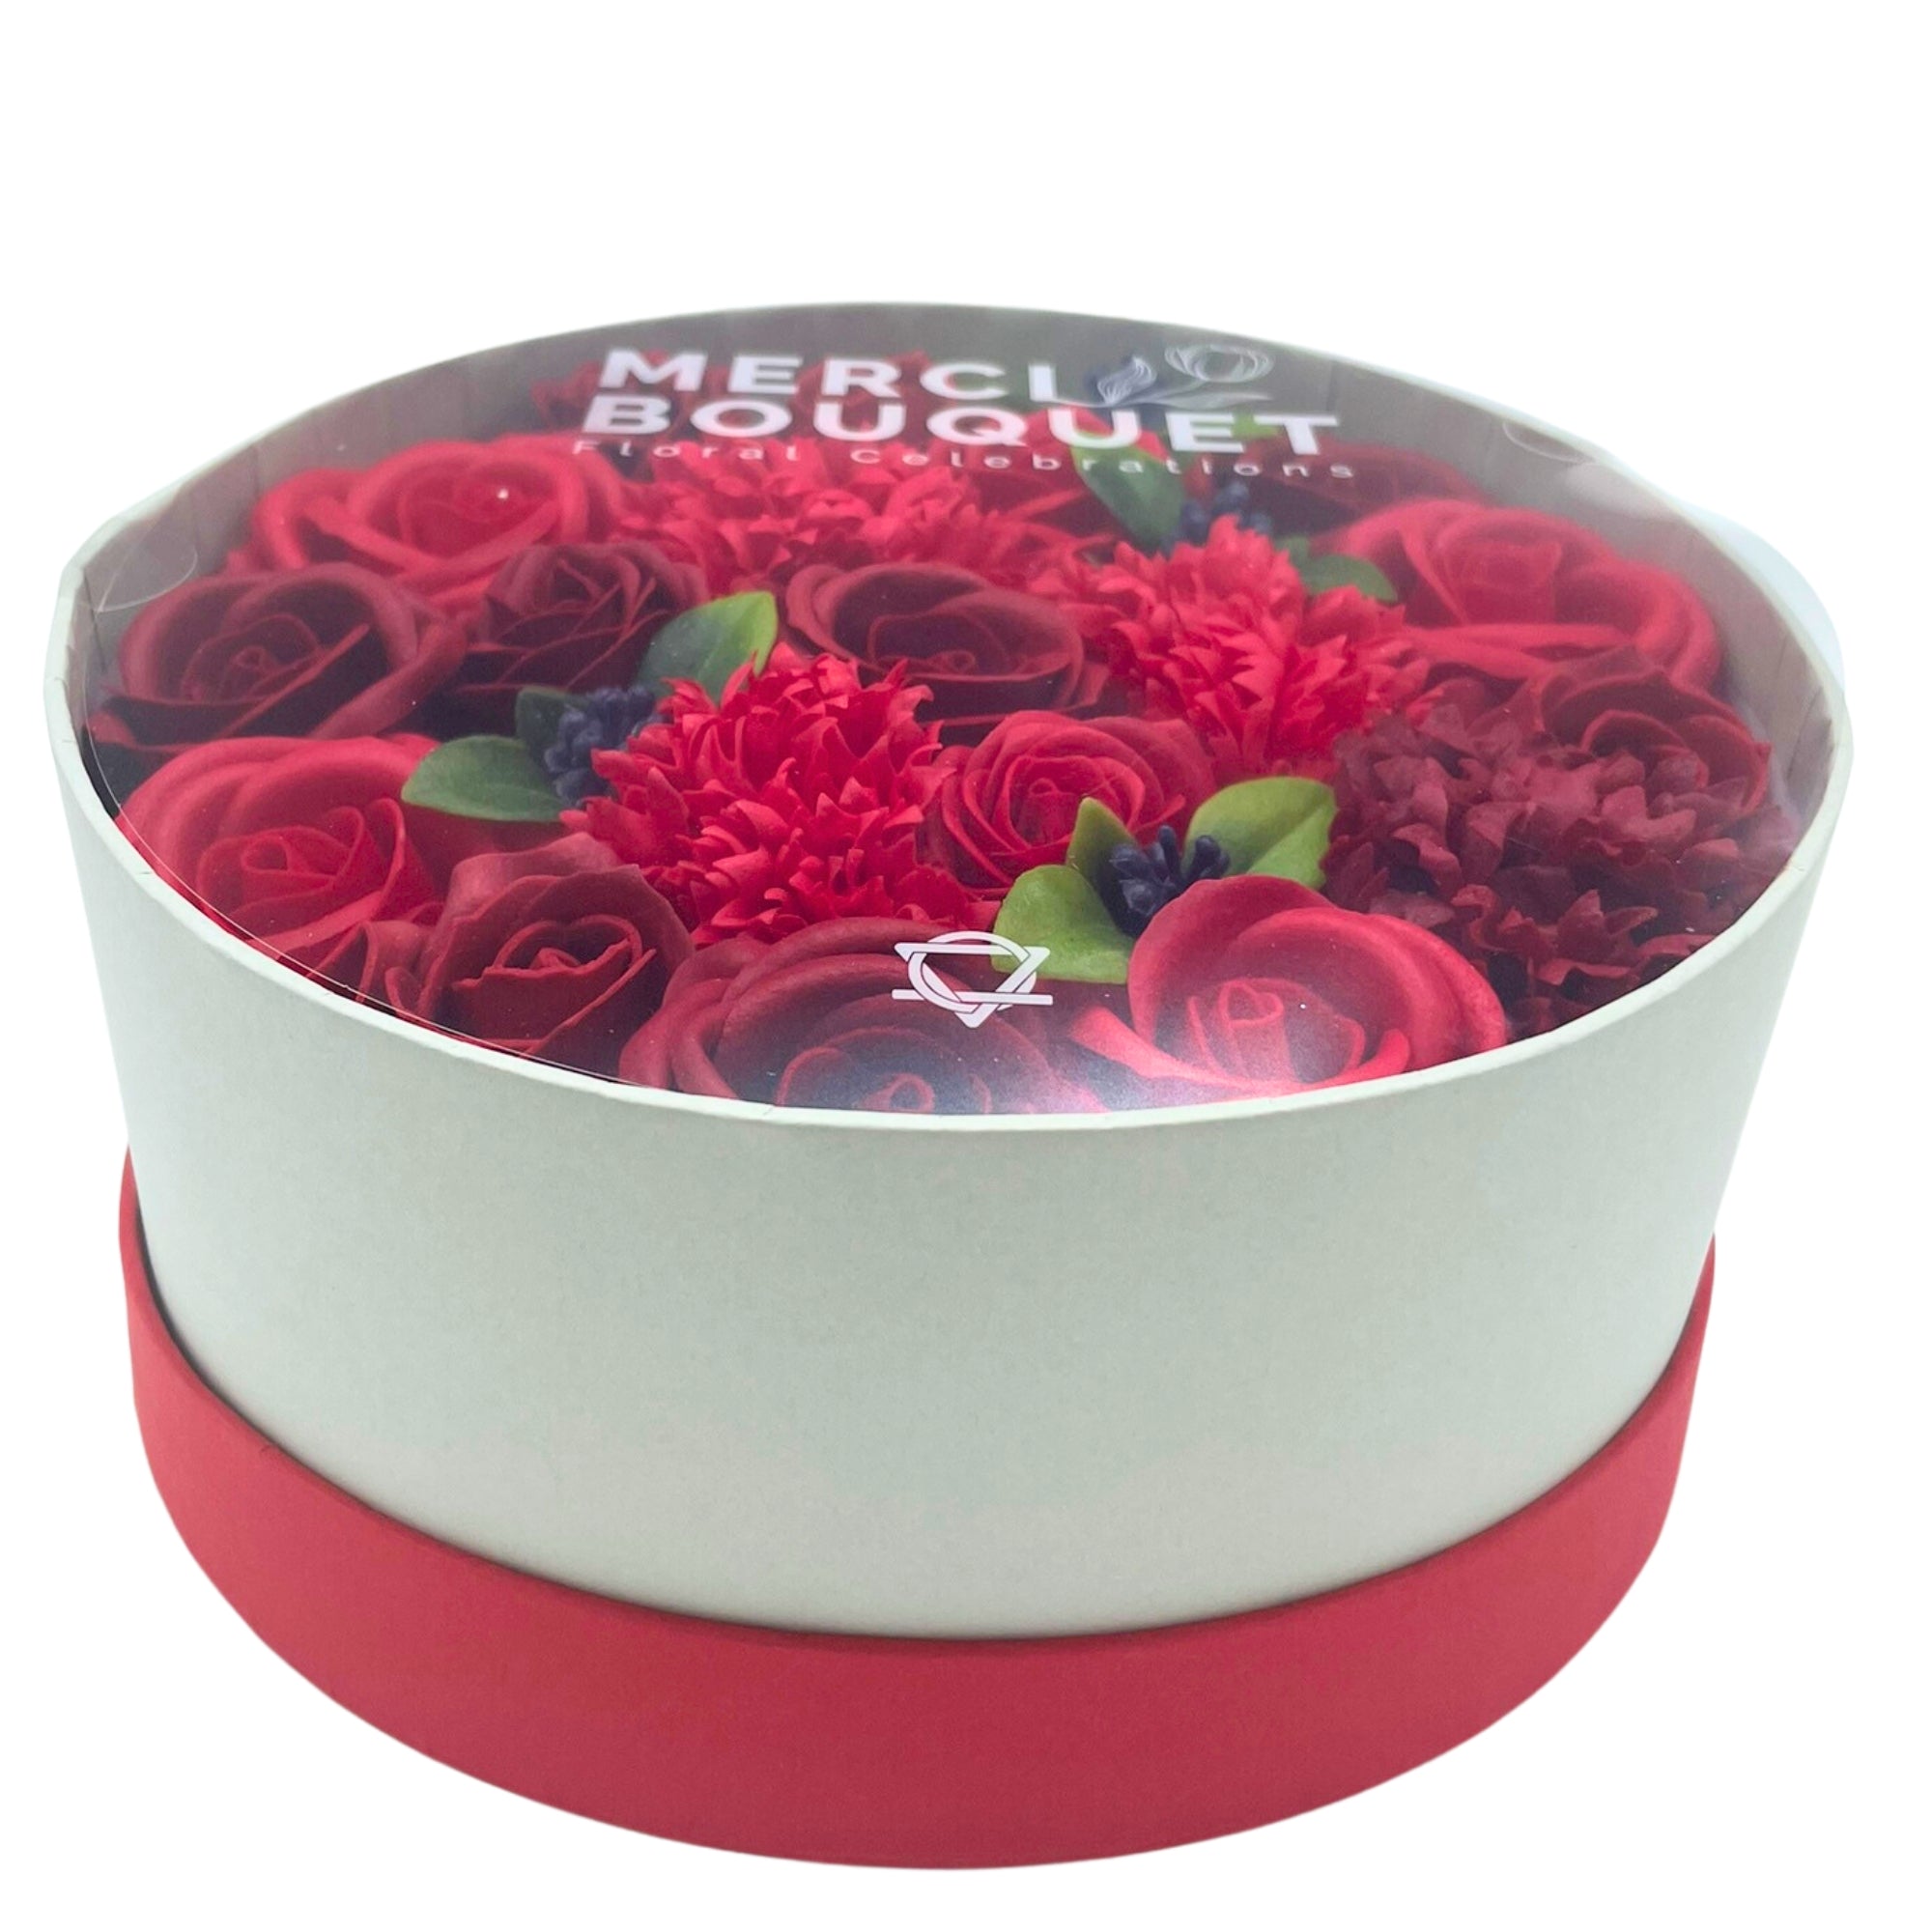 View Round Box Classic Red Roses information